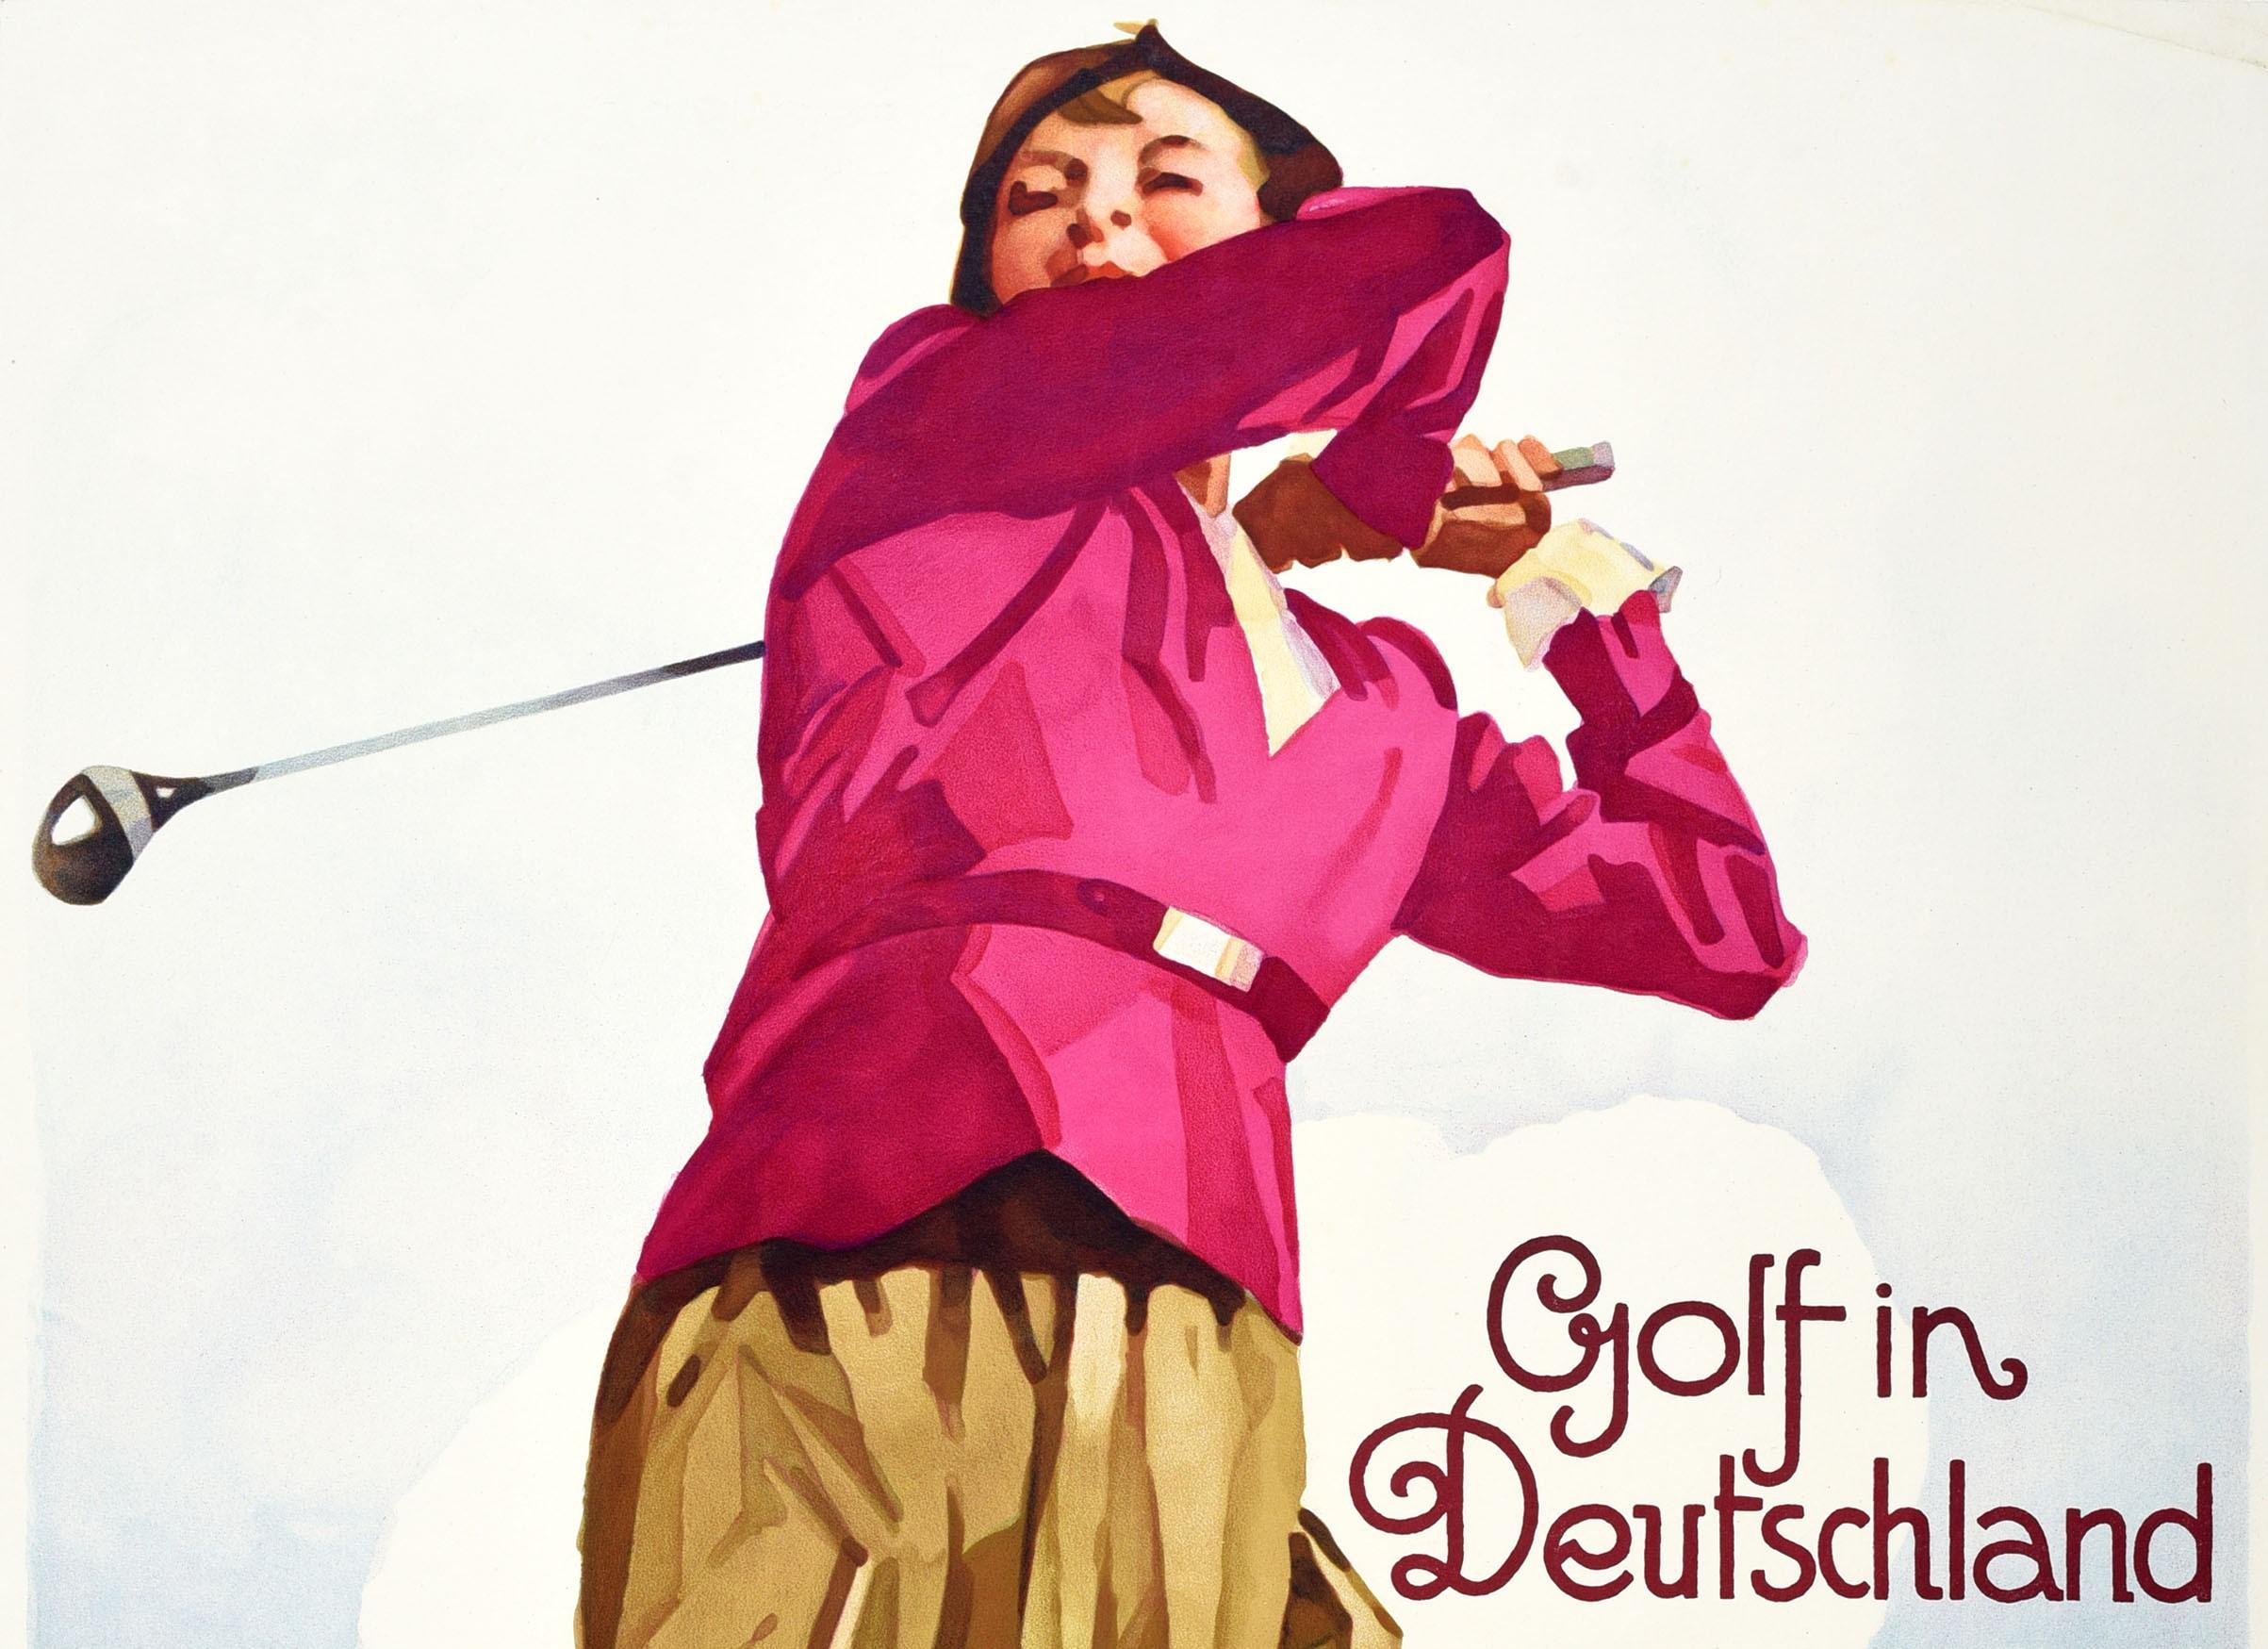 Original vintage sport travel poster - Golf in Deutschland - featuring stunning artwork by the notable German graphic artist Ludwig Hohlwein (1874-1949) of a golfer in full swing on the green, trees and the silhouette of a castle ruin on a hill